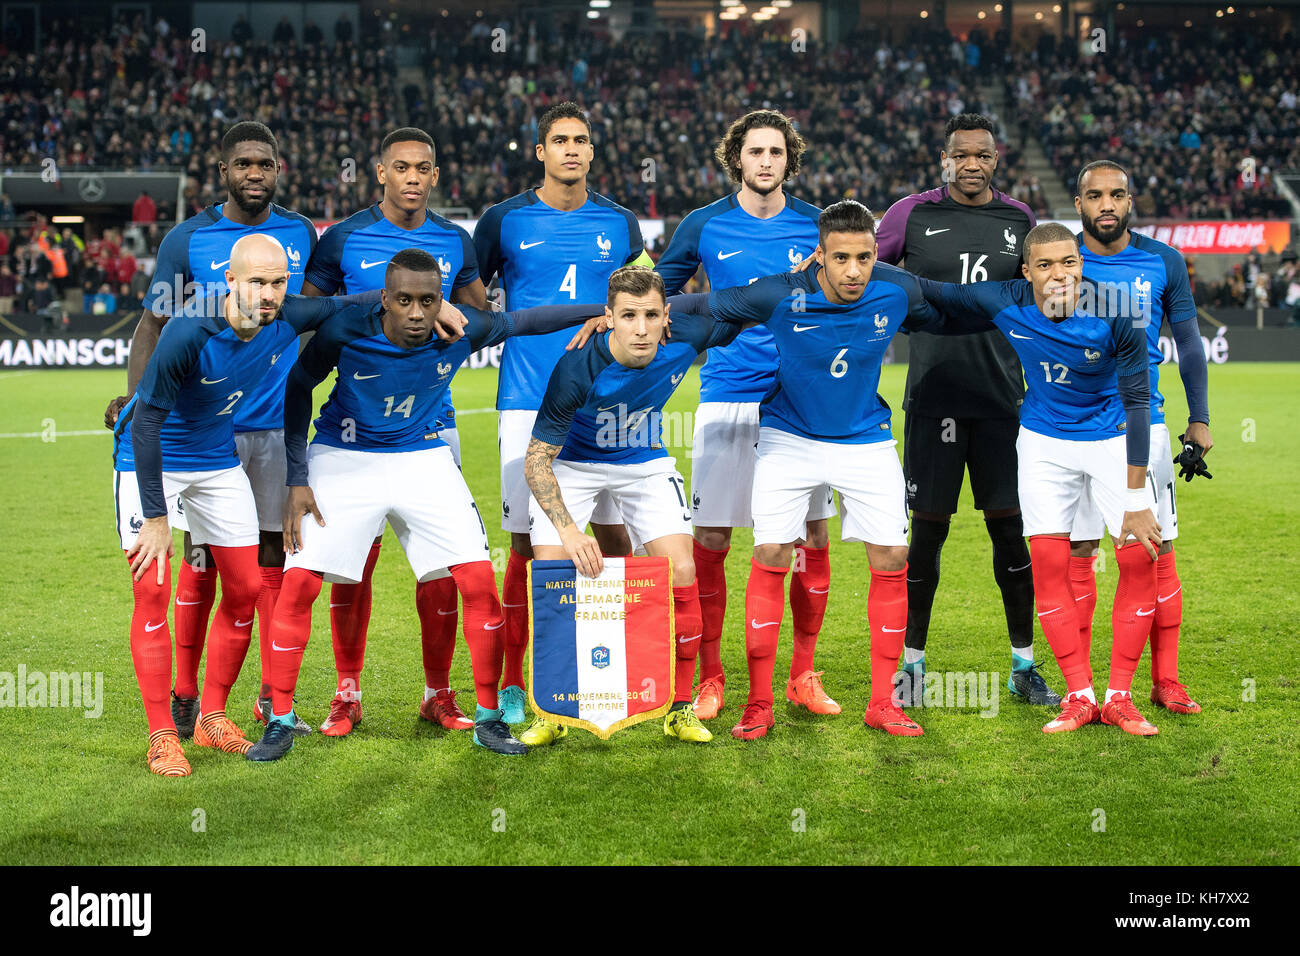 Cologne, Germany. 14th Nov, 2017. Soccer: International match, Germany -  France in Cologne, Germany, 14 November 2017. French national team players  pose for the team photo before the match. Back row (L-R)Samuel